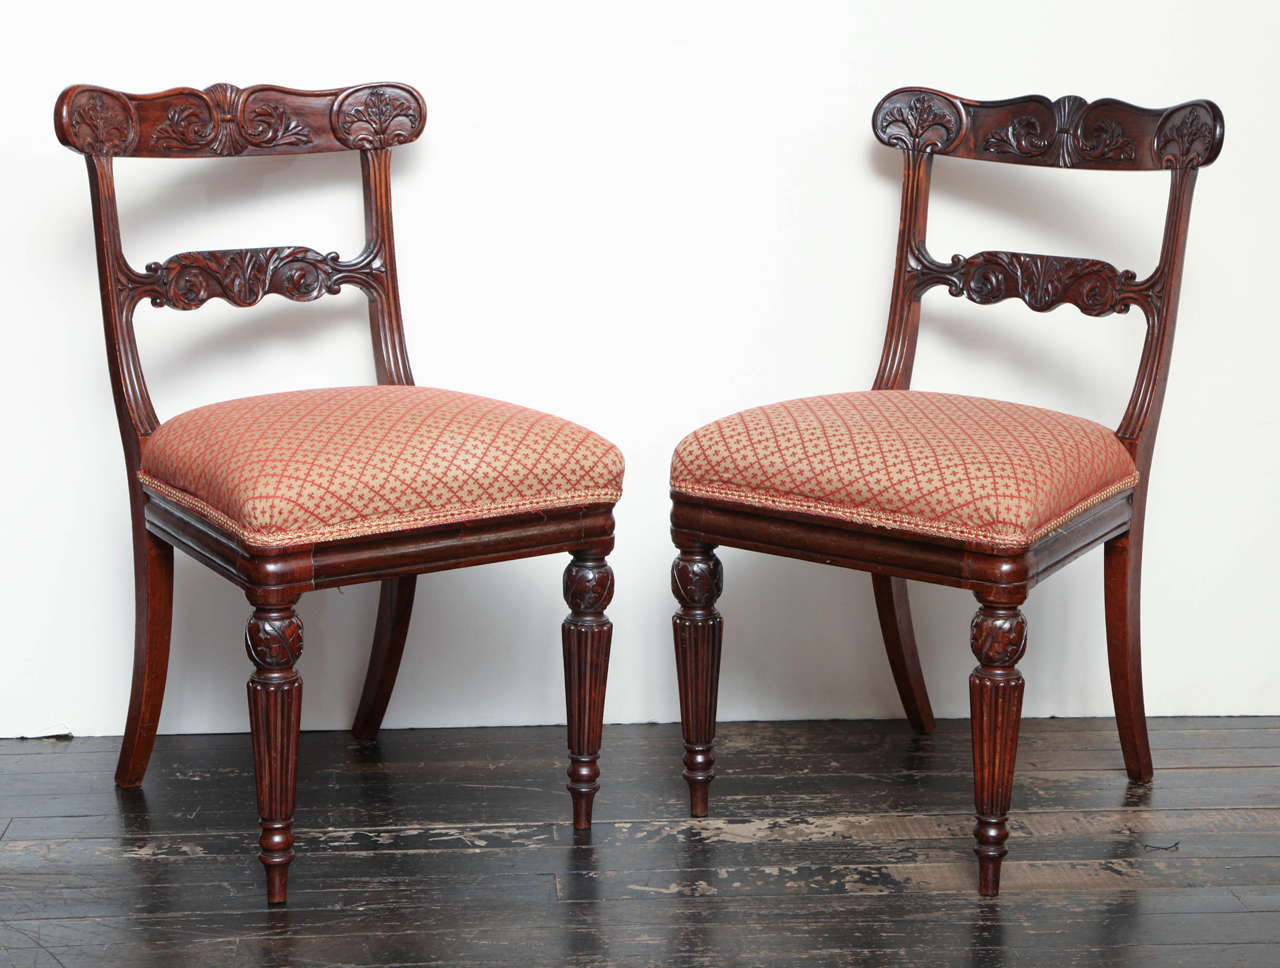 Set of six early 19th century English Regency side chairs.